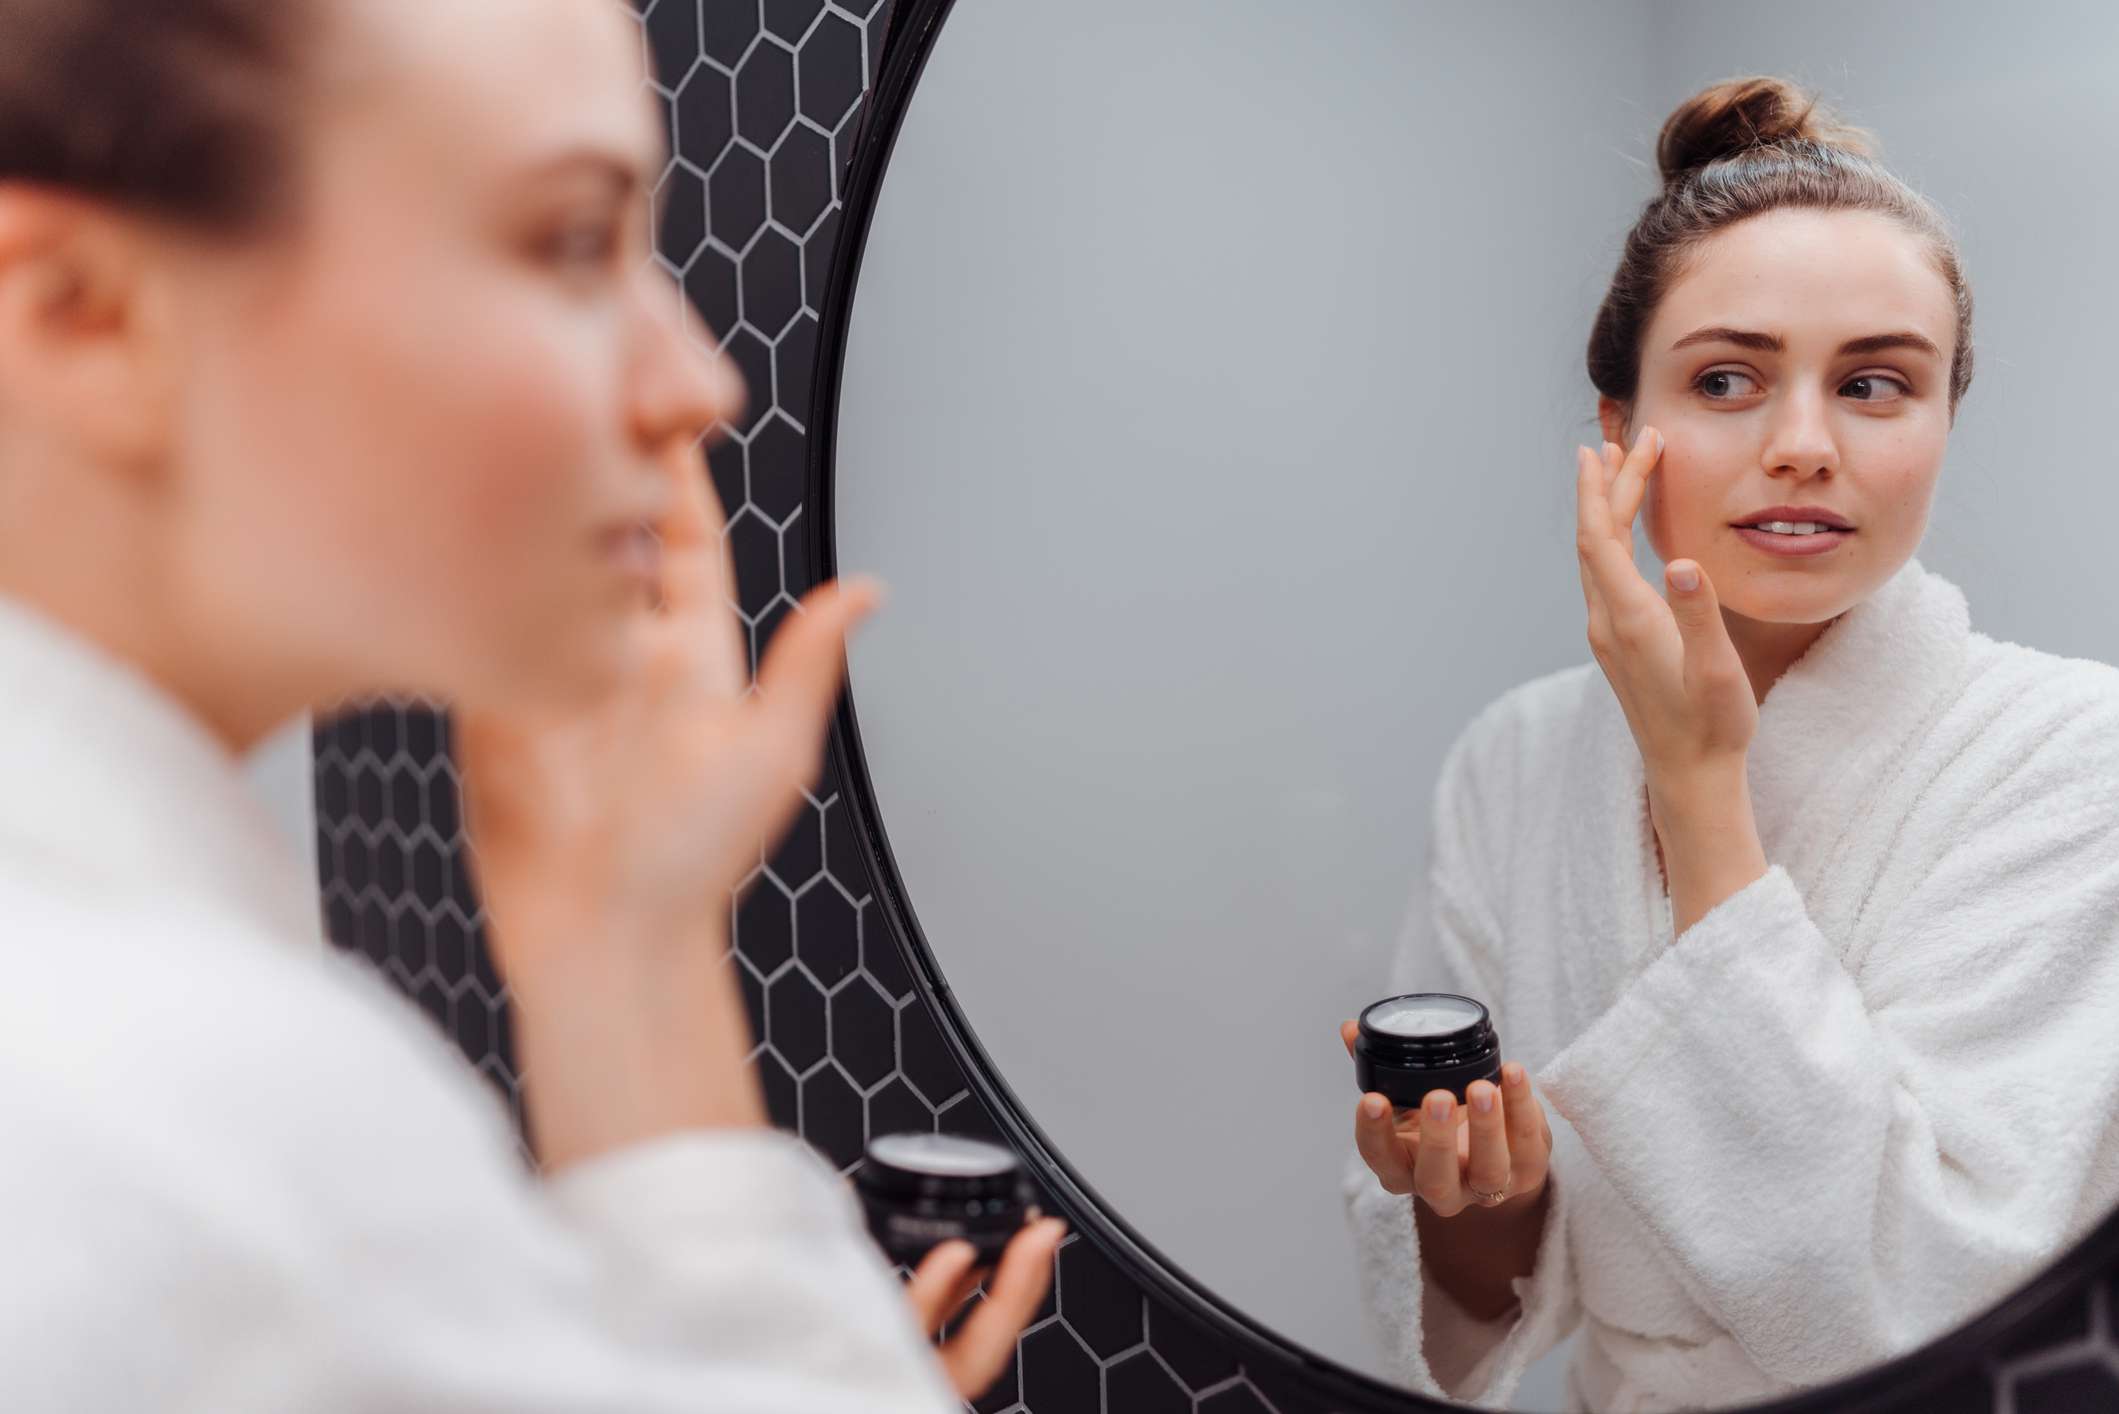 7 Things To Avoid While Using Reliable Skin Care Products